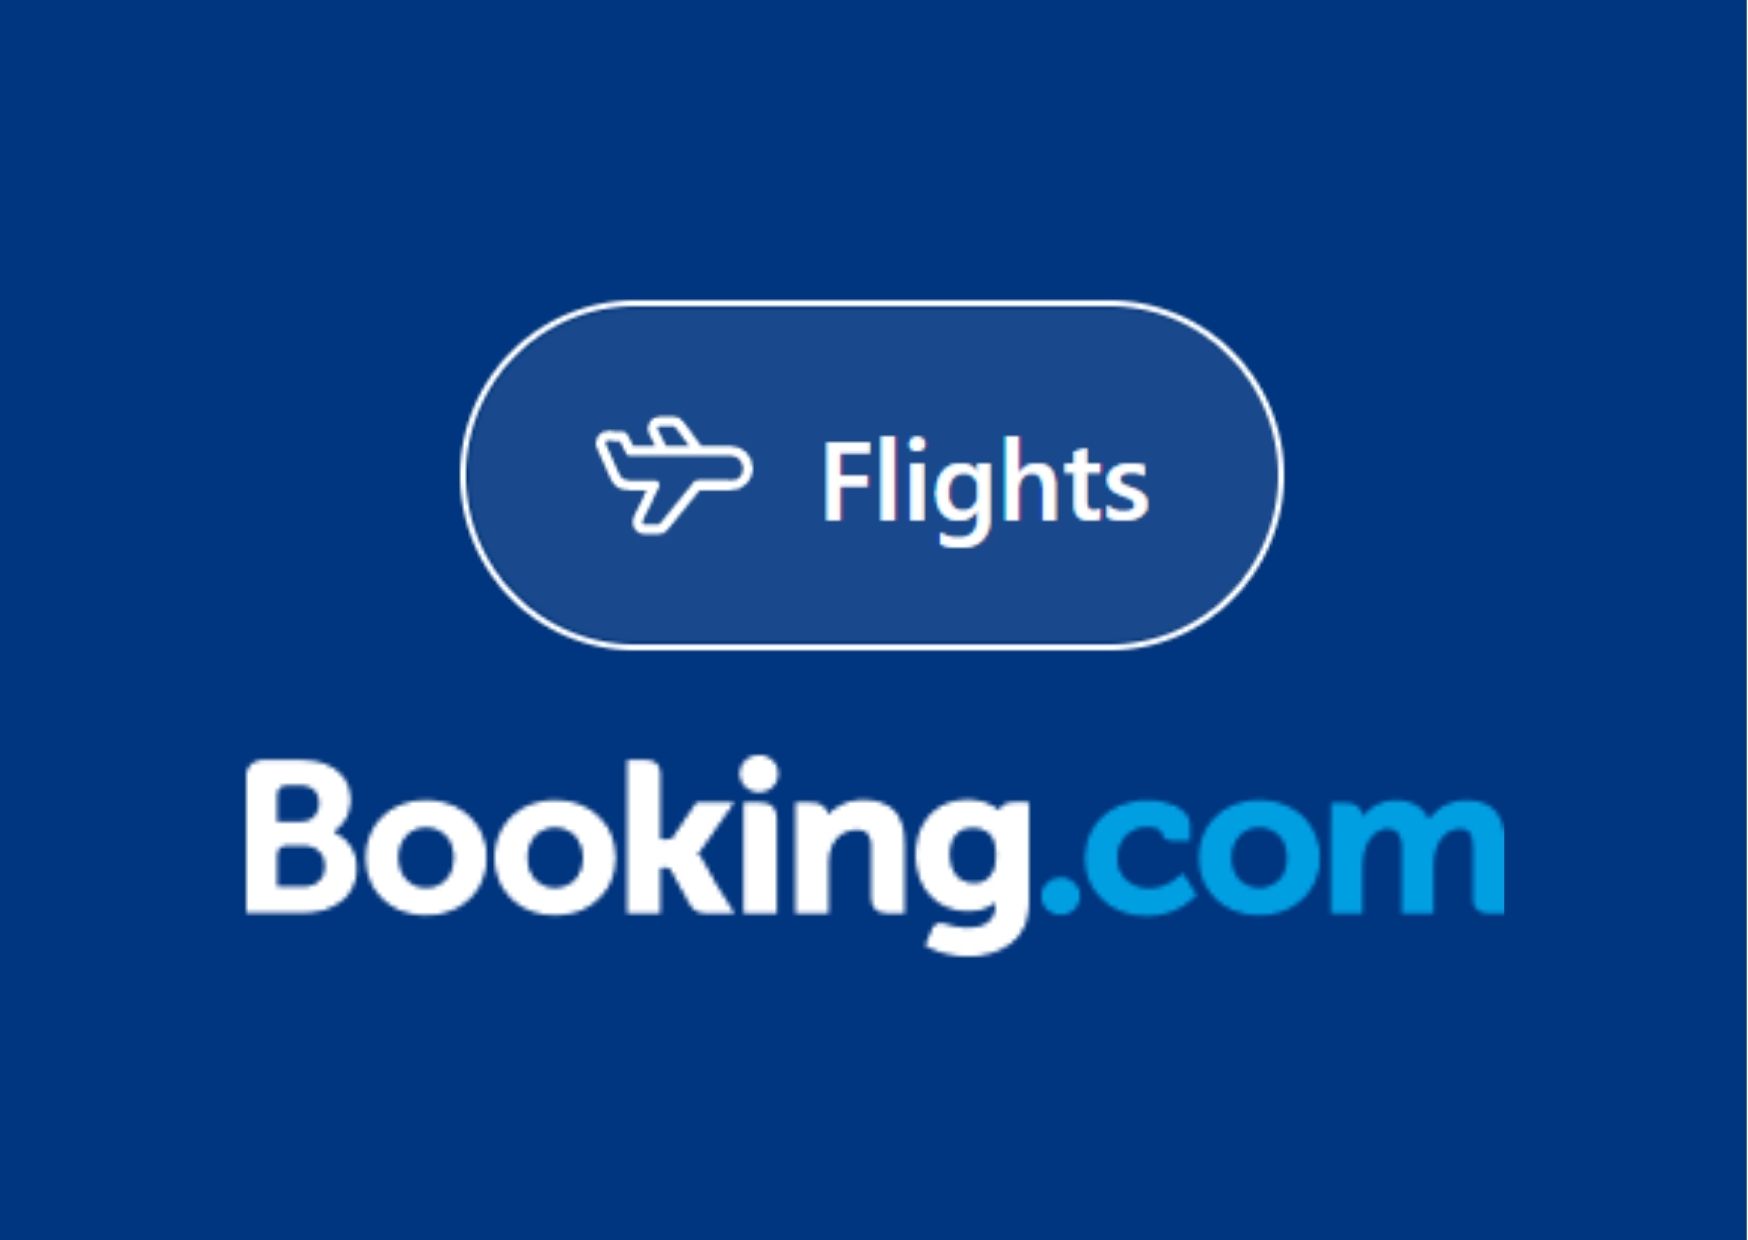 Booking.com announces new and improved flights experience in India - Travel  Trade Journal